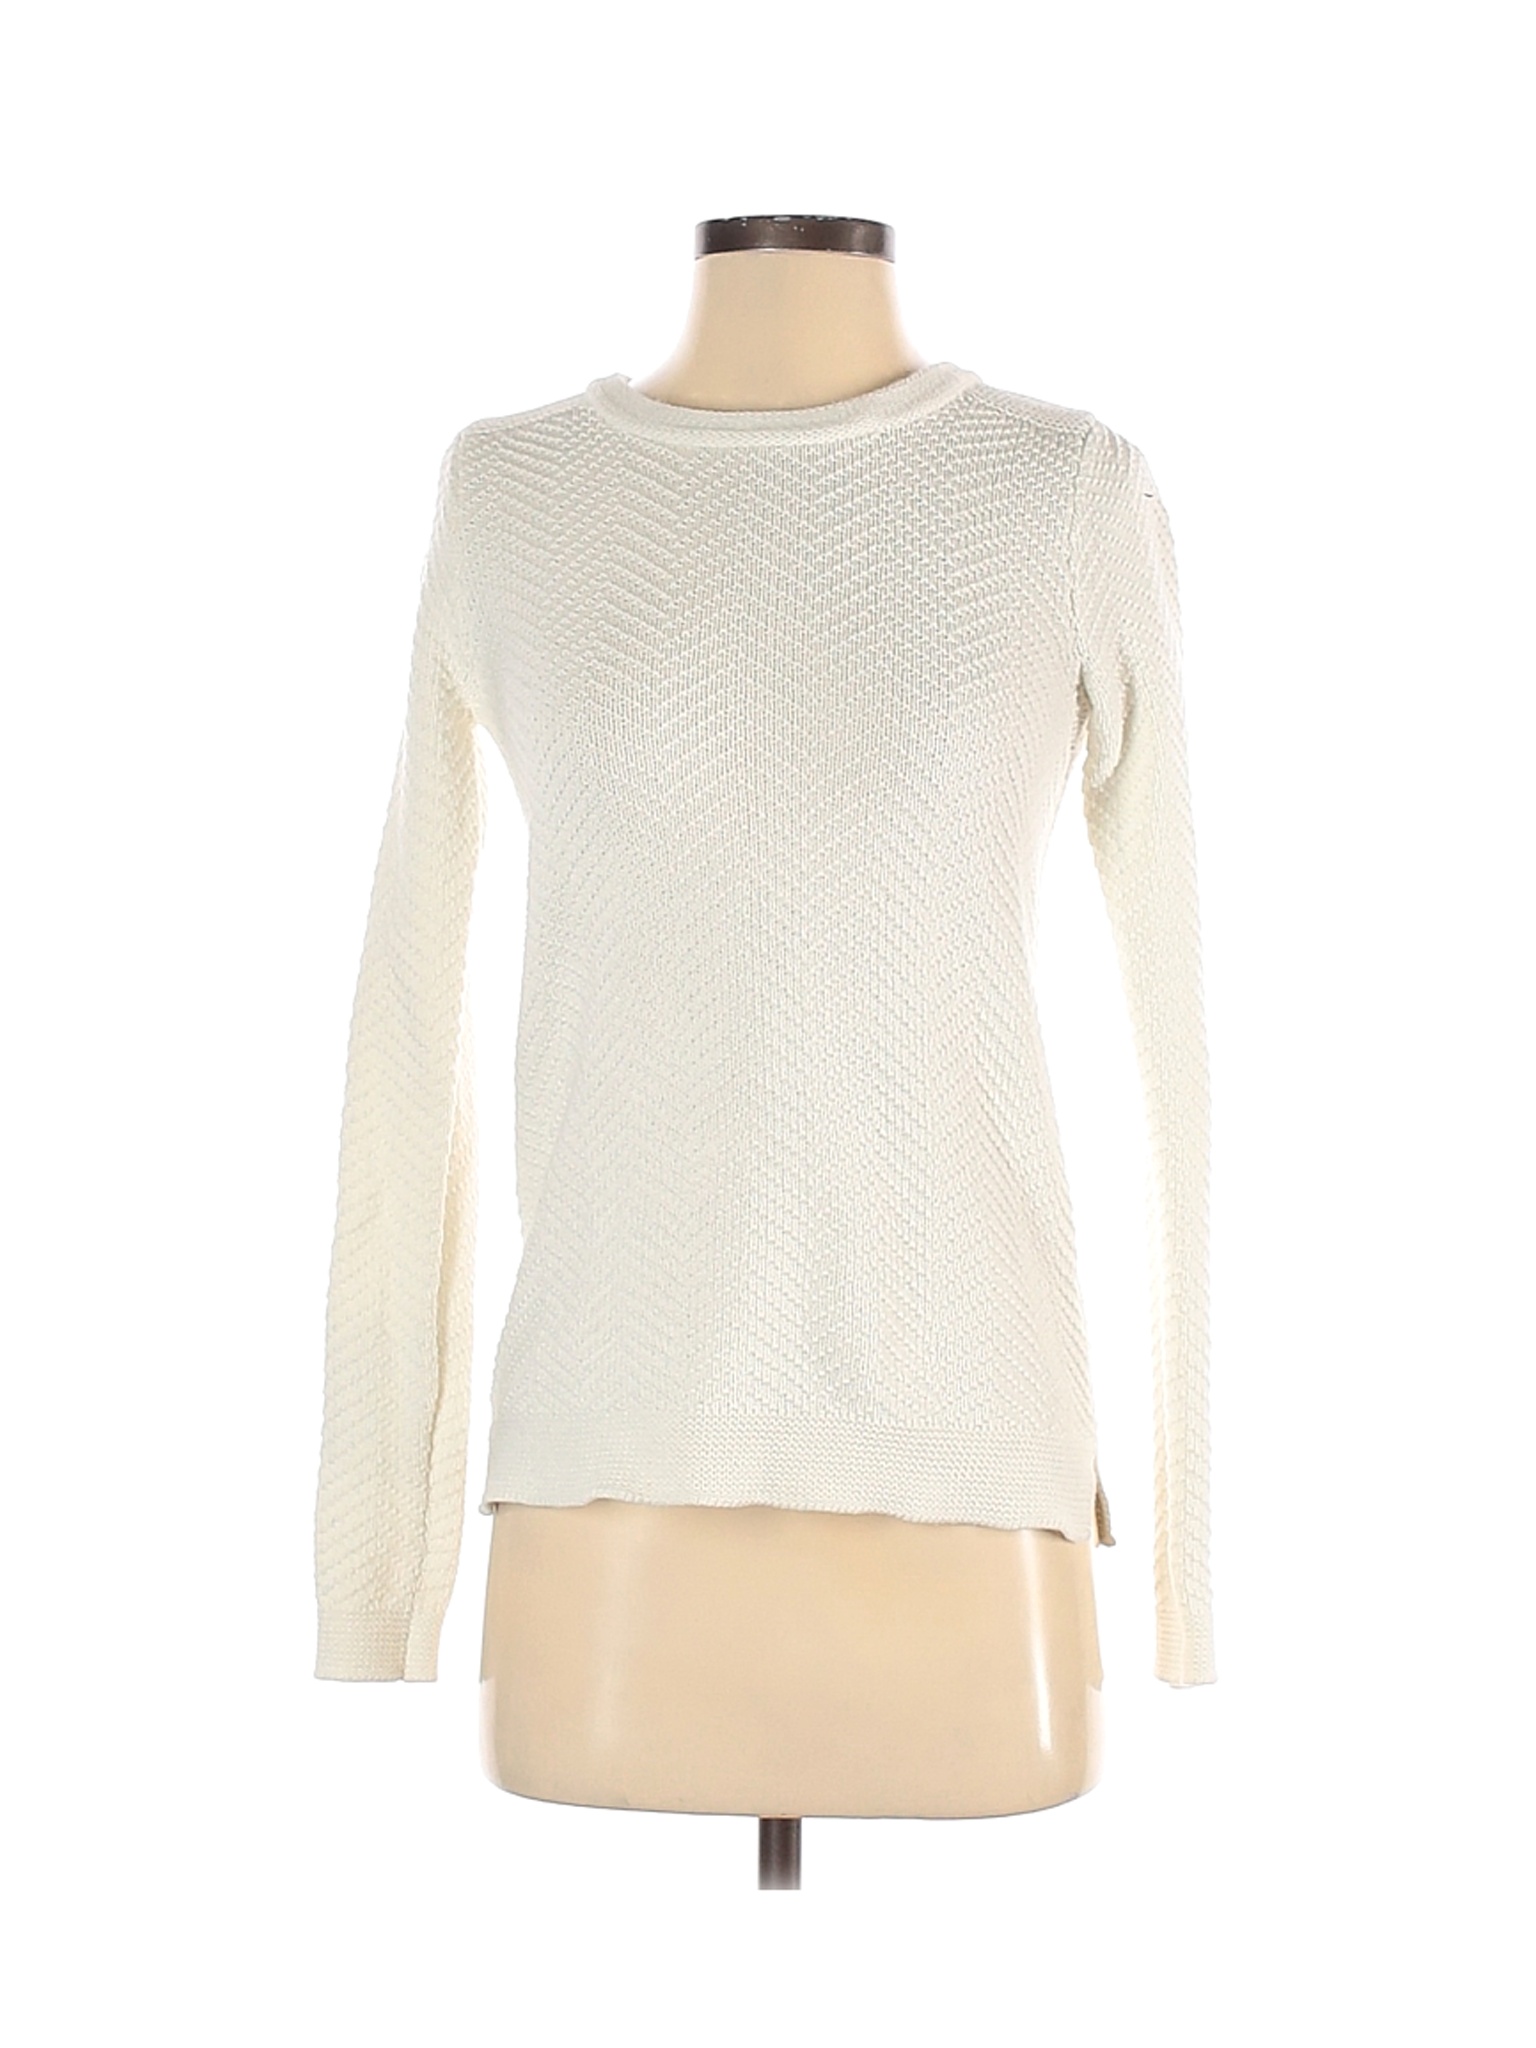 Old Navy Women Ivory Pullover Sweater XS | eBay